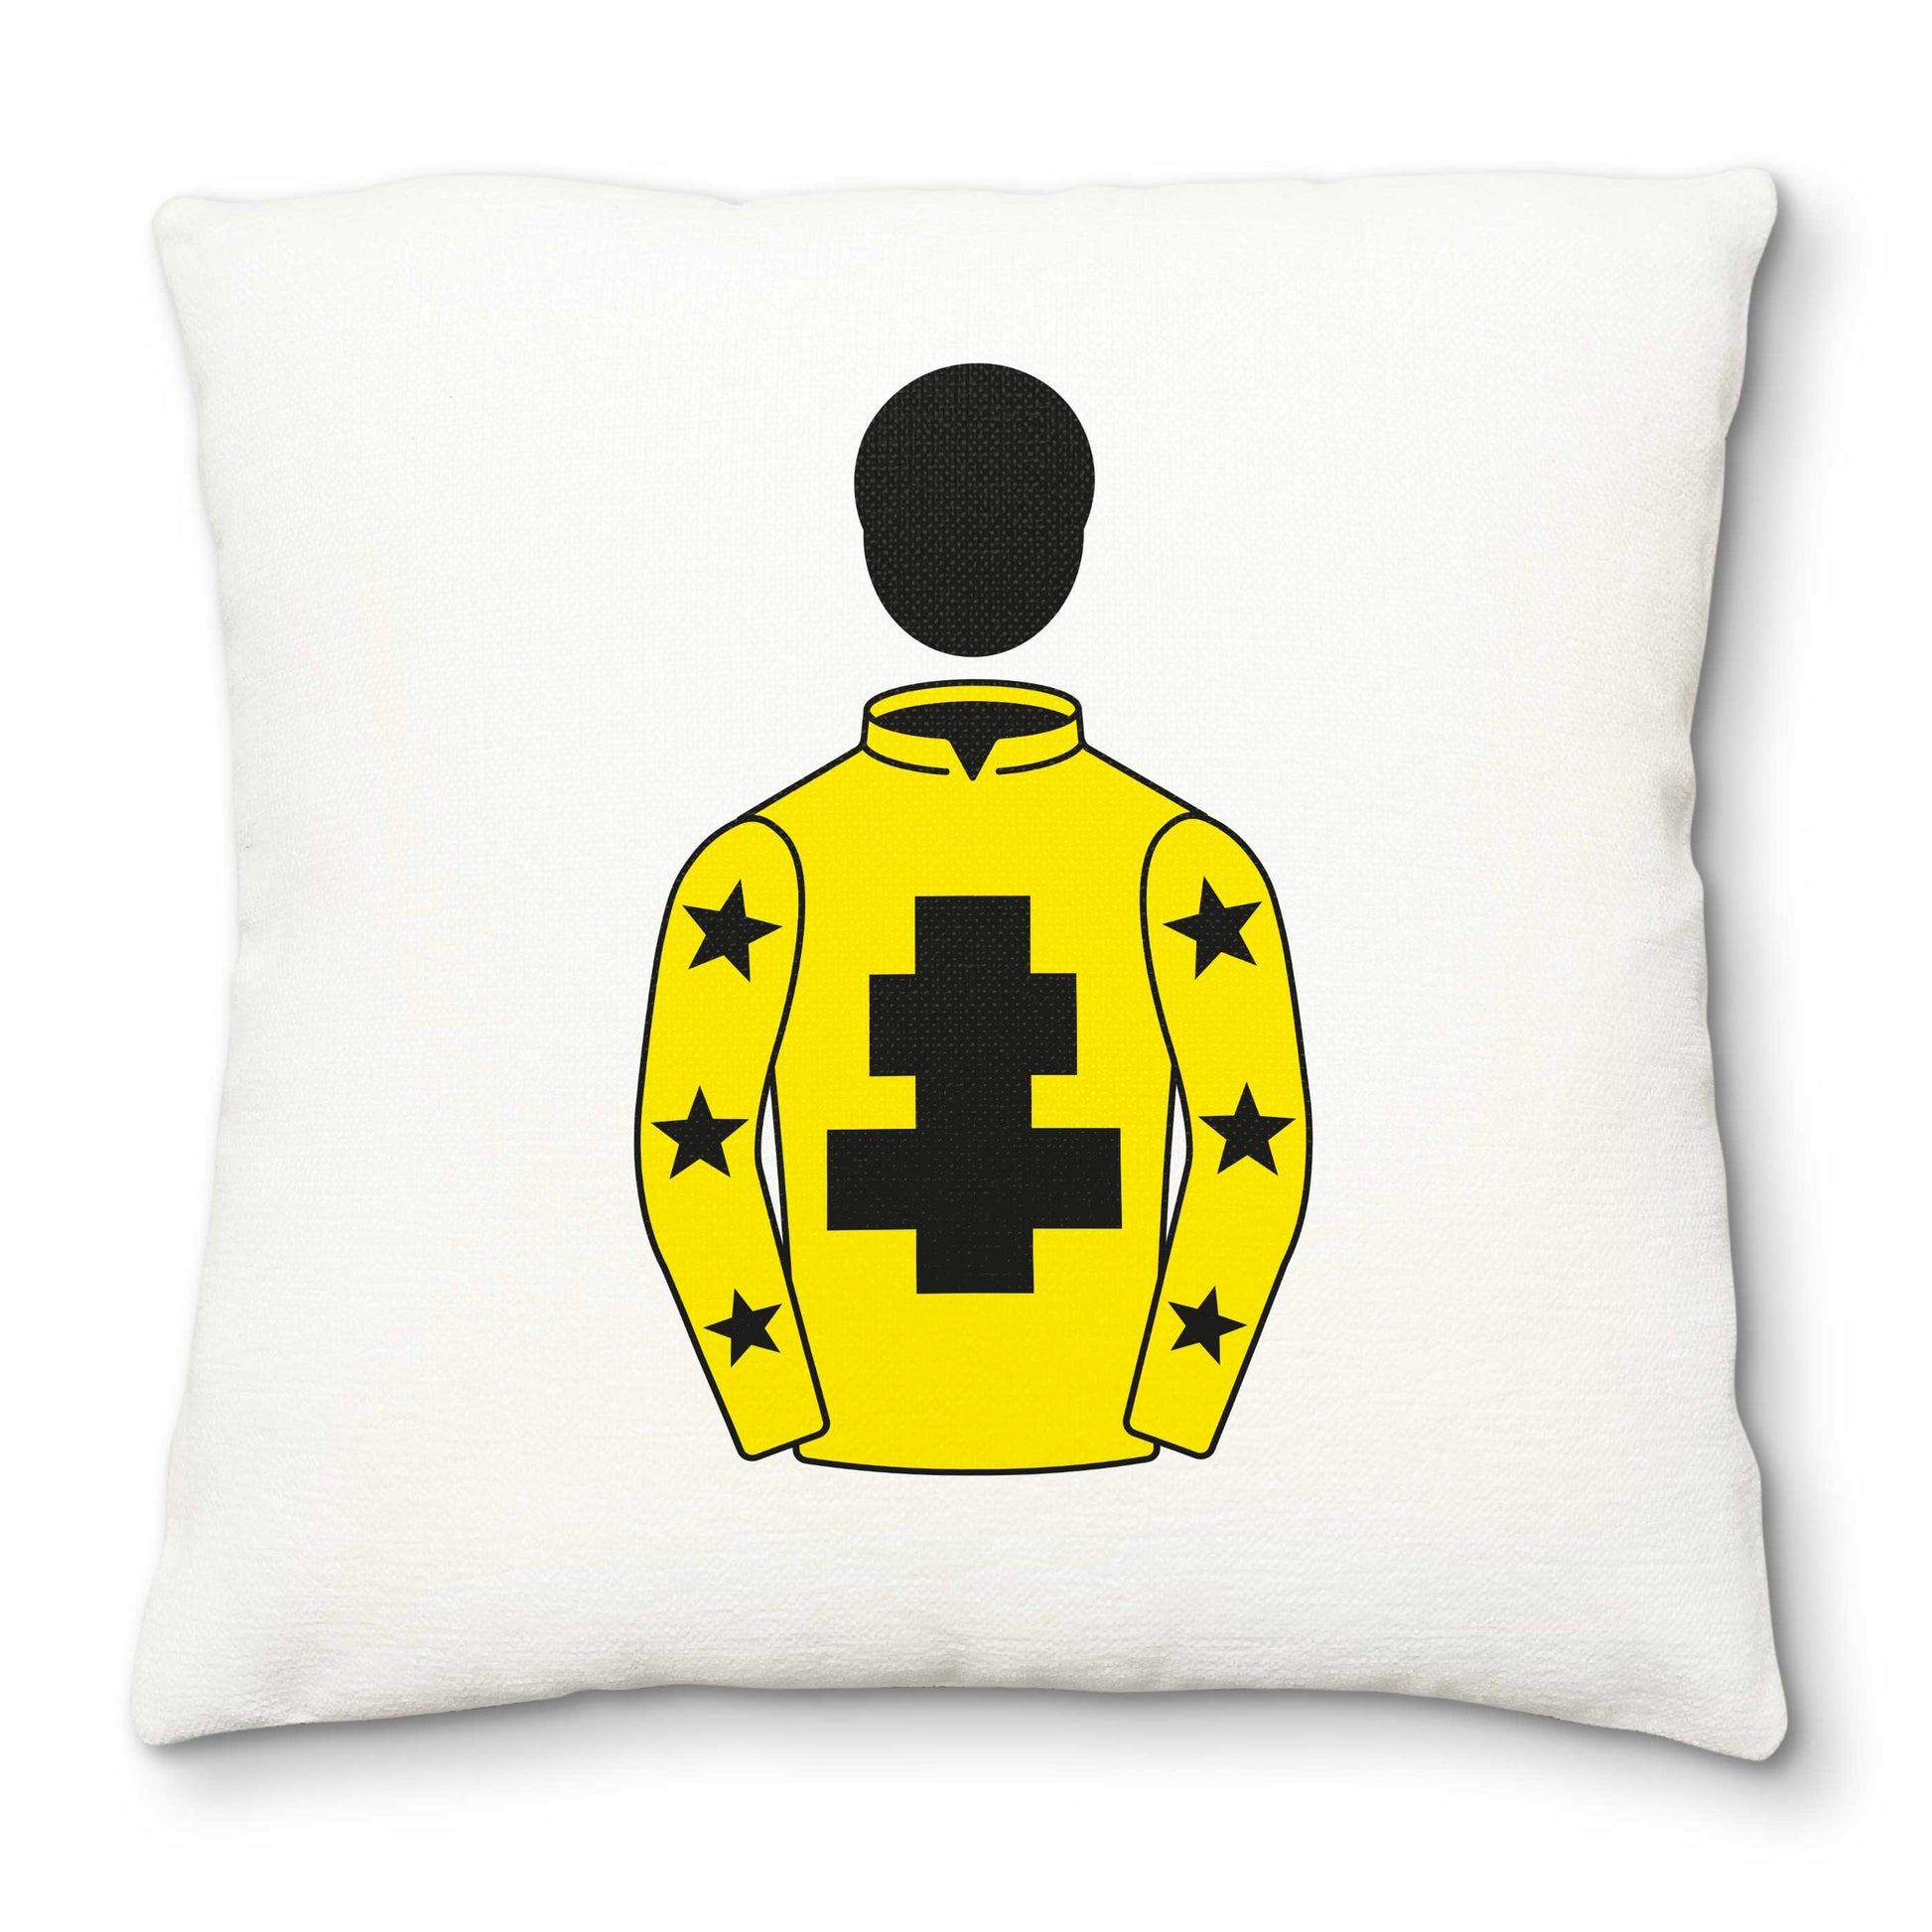 Niall Farrell And Friends Deluxe Cushion Cover - Deluxe Cushion Cover - Hacked Up